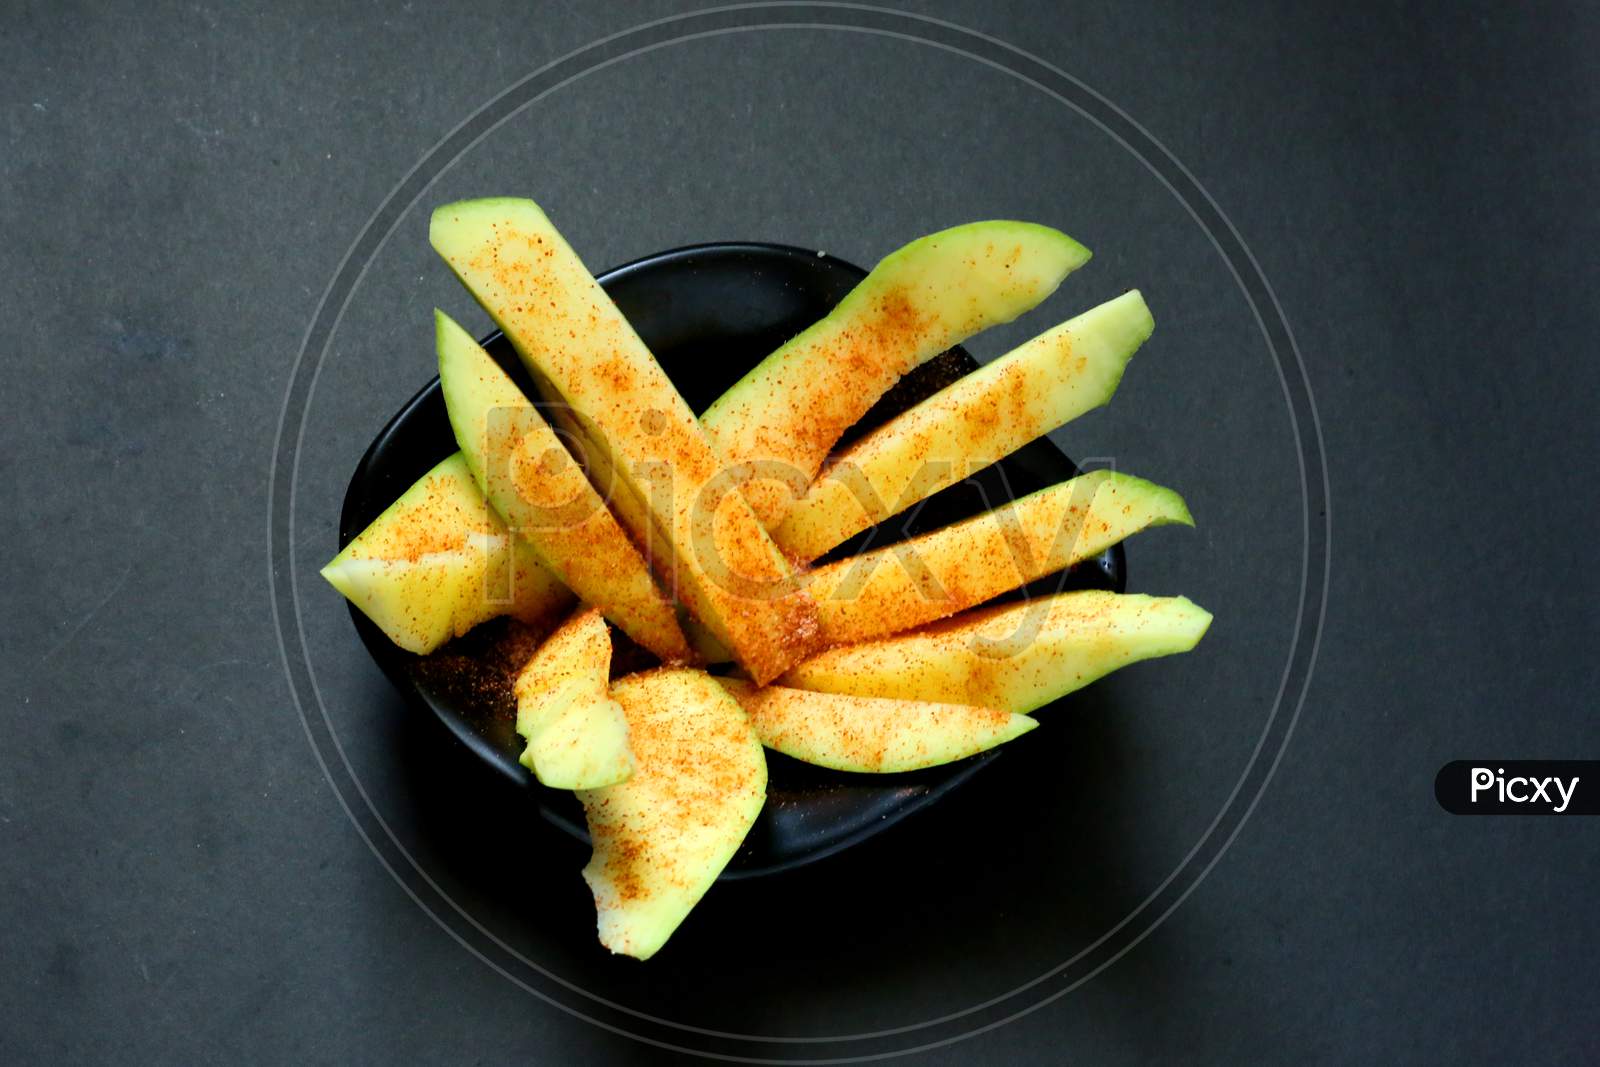 Raw Mango Slices With Salt And Chilli Powder On Isolated Black Background.